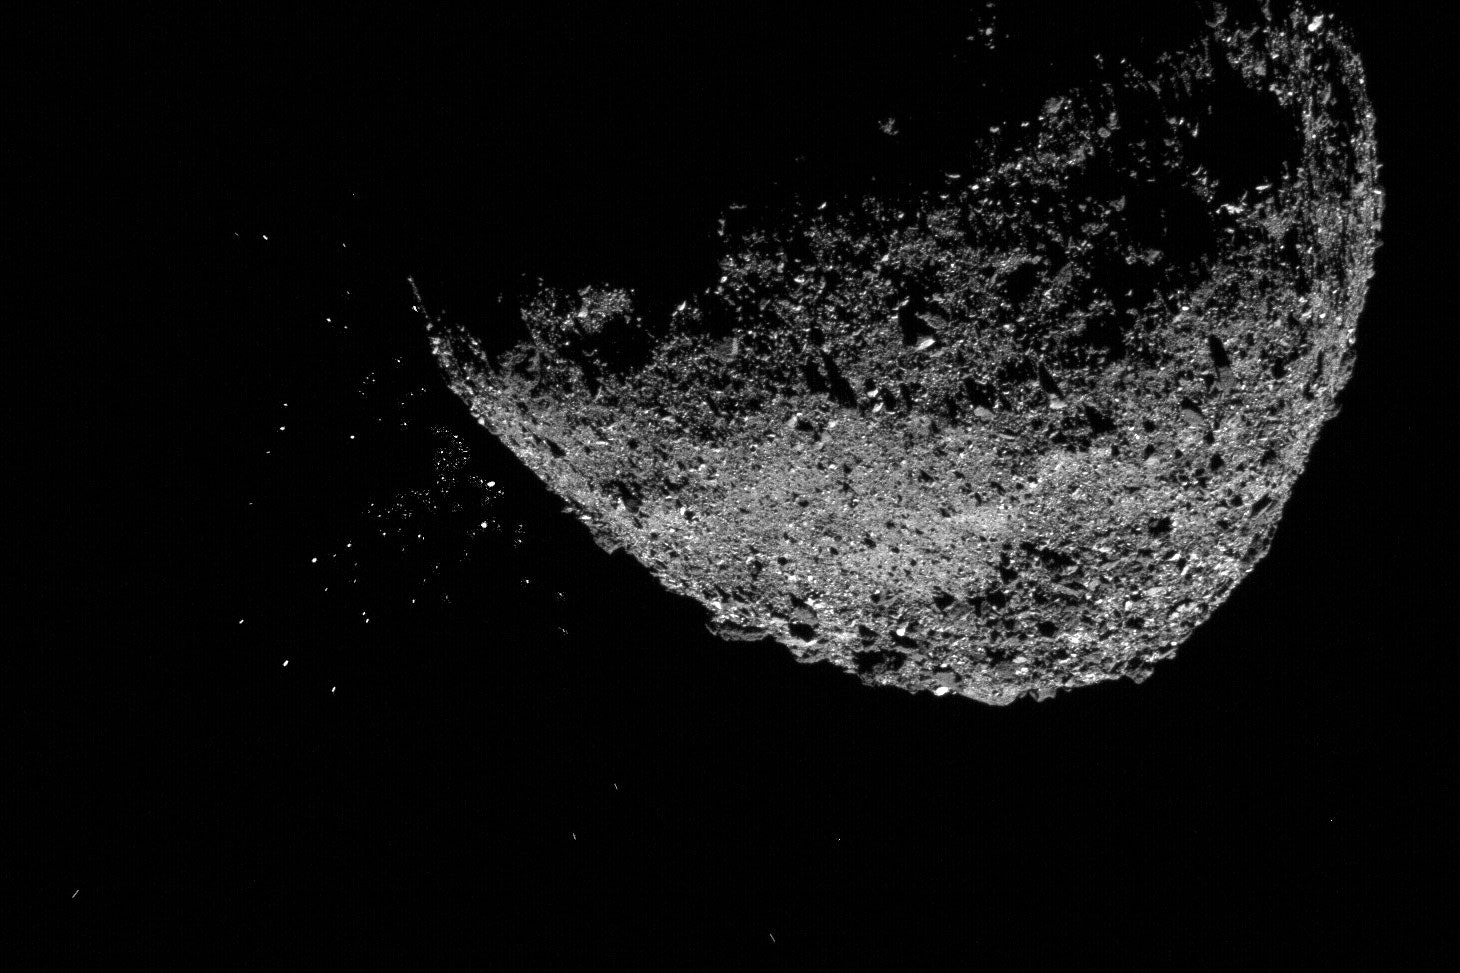 Science_asteroid_sub_combined_image_jan6%5B1%5D.jpg